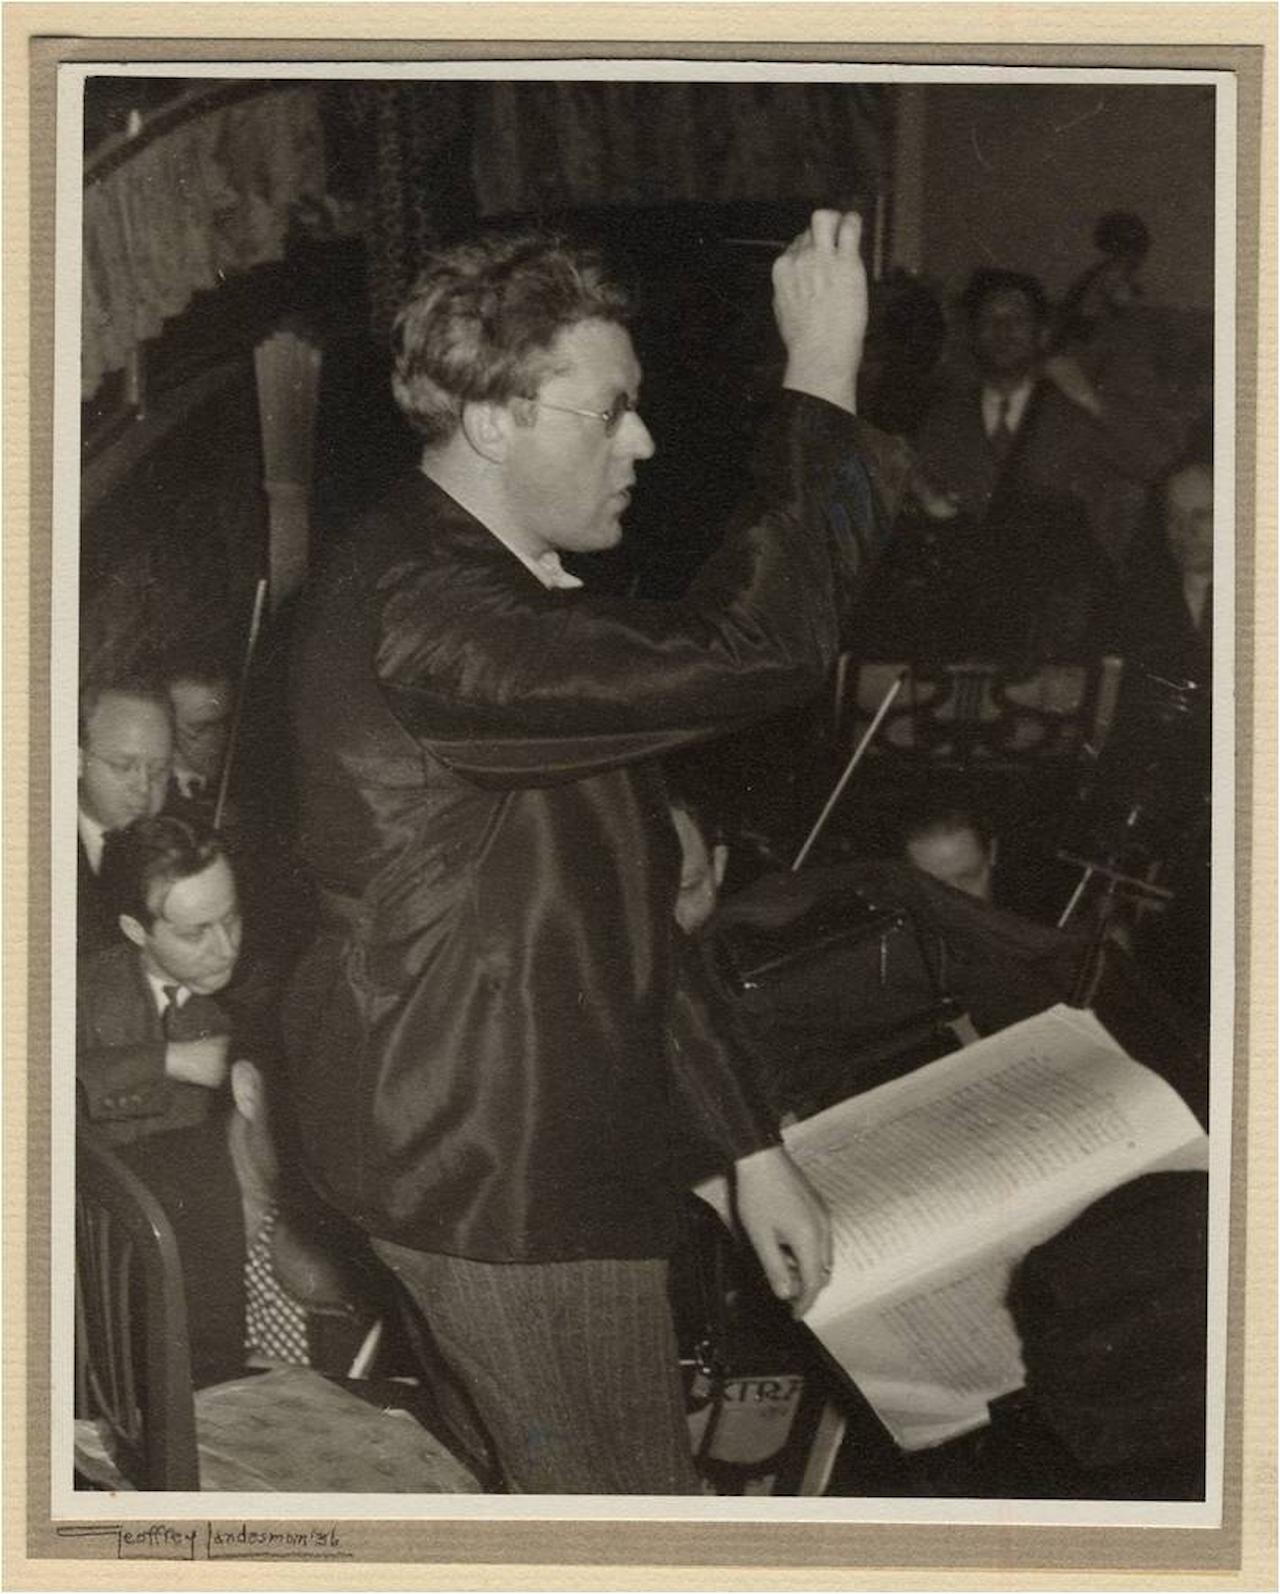 Rodzinski in the orchestra pit, early 1930s.